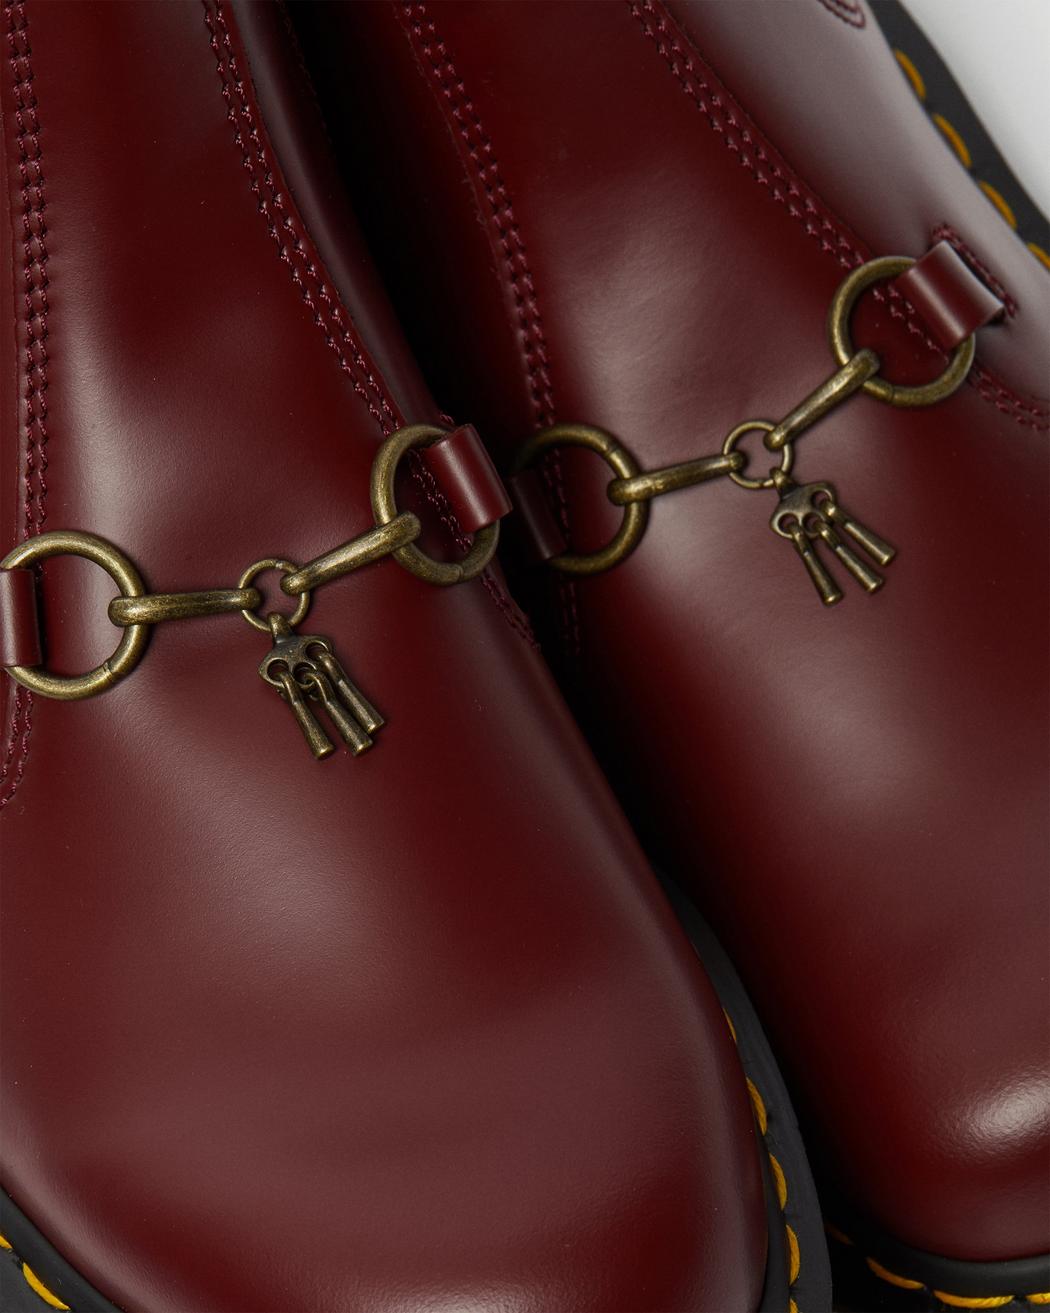 Dr. Martens: Needles 2976 Snaffle Chelsea Boots (cherry)